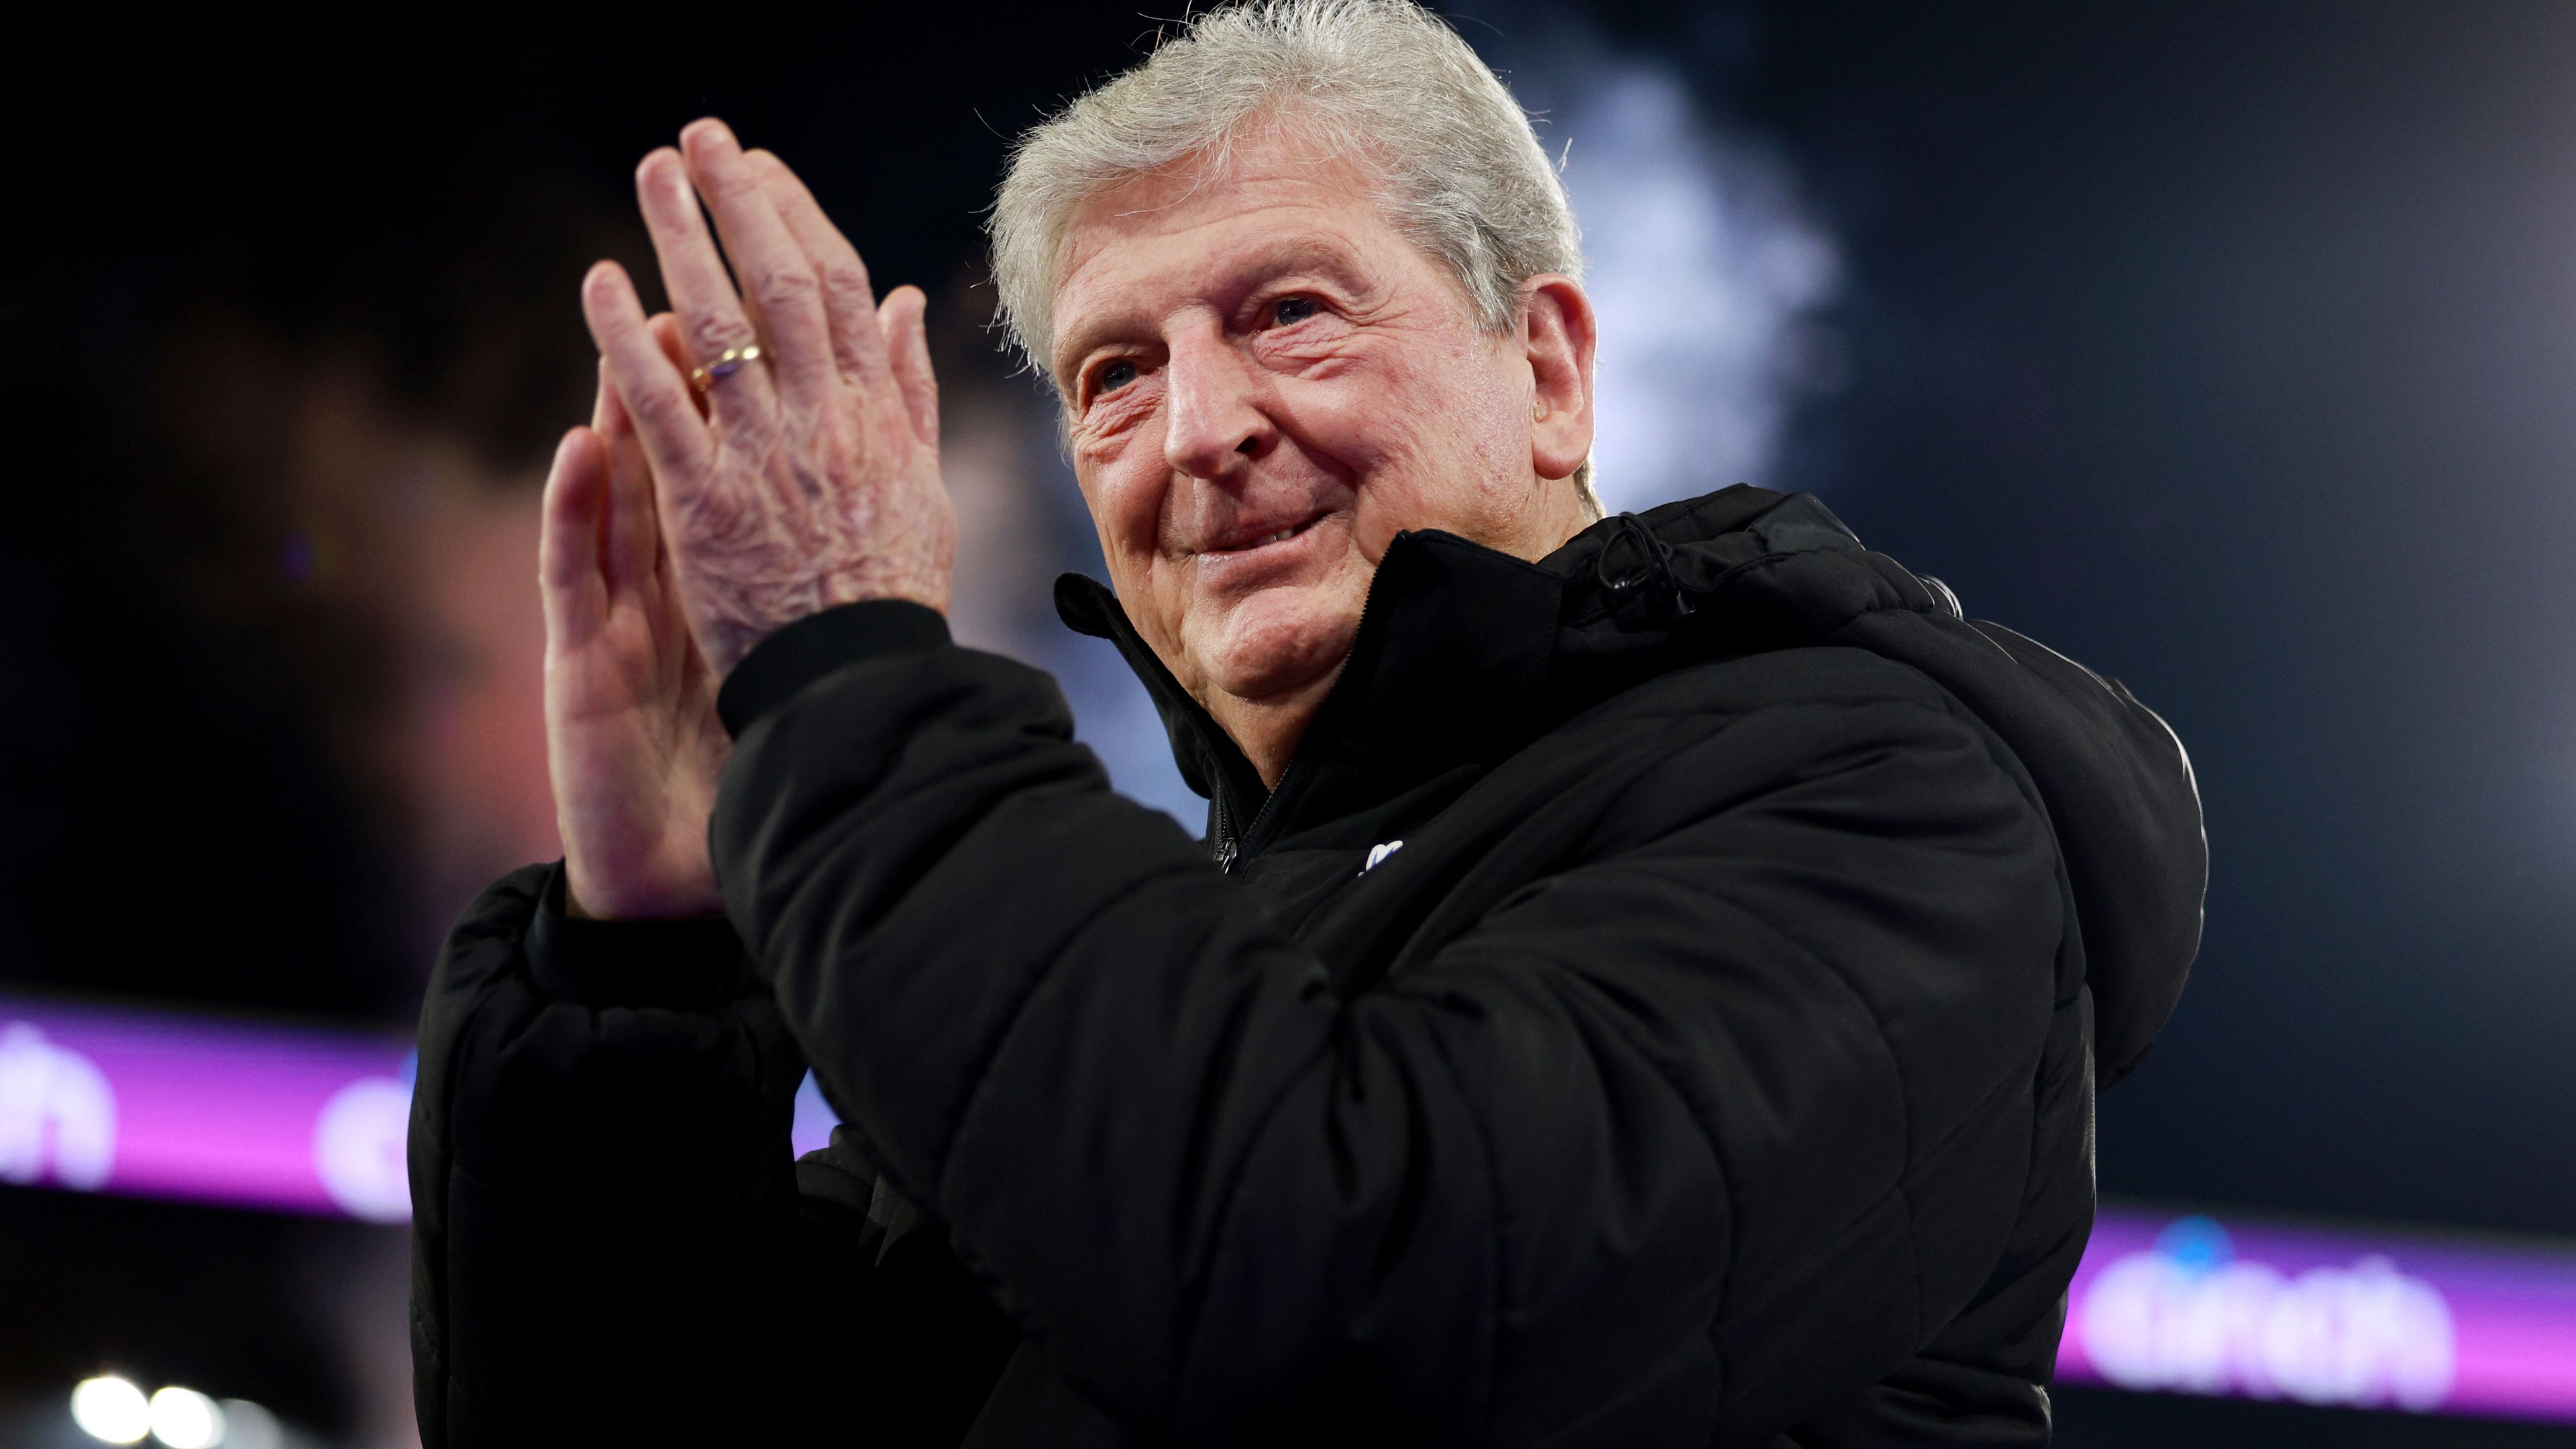 Long-time Premier League coach Roy Hodgson quits job days after being hospitalised at training